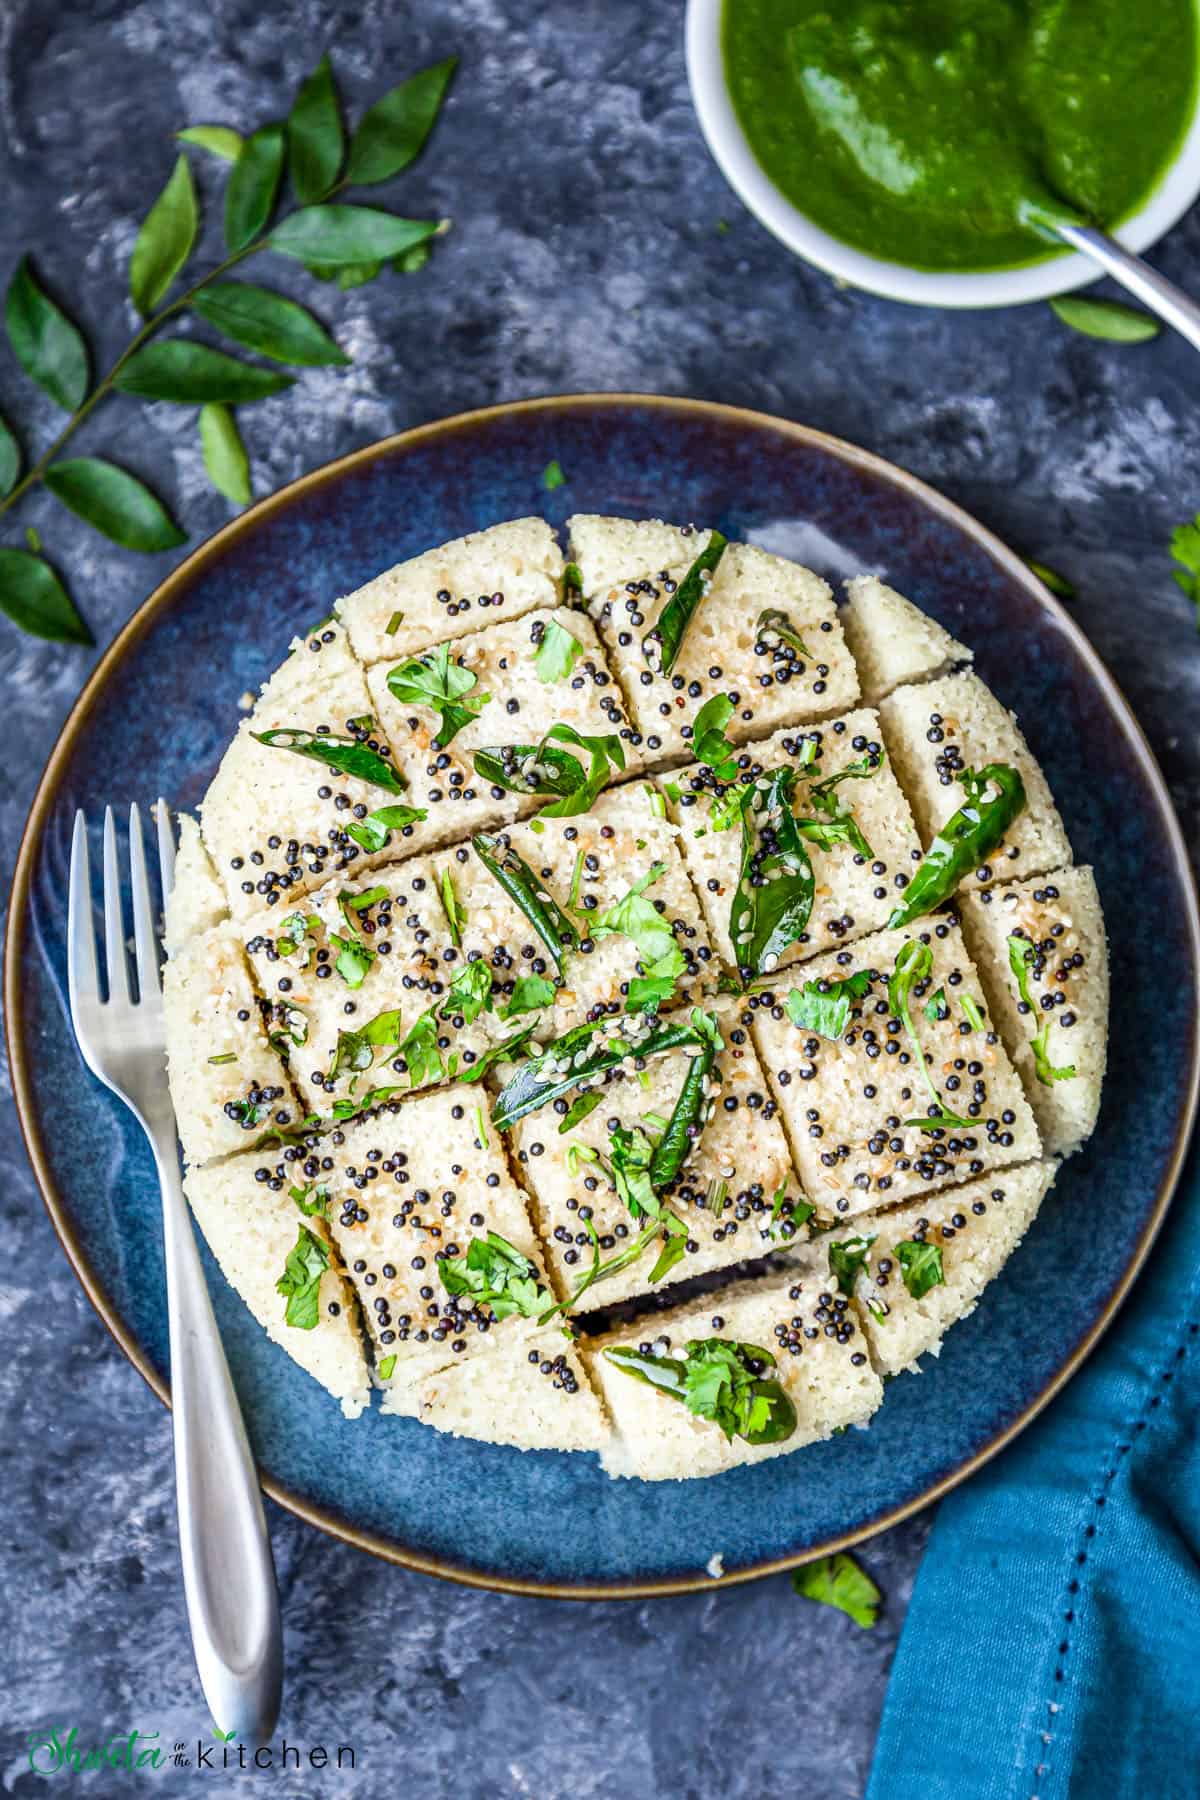 top view of Rava dhokla with tempering cut into pieces and placed on blue plate